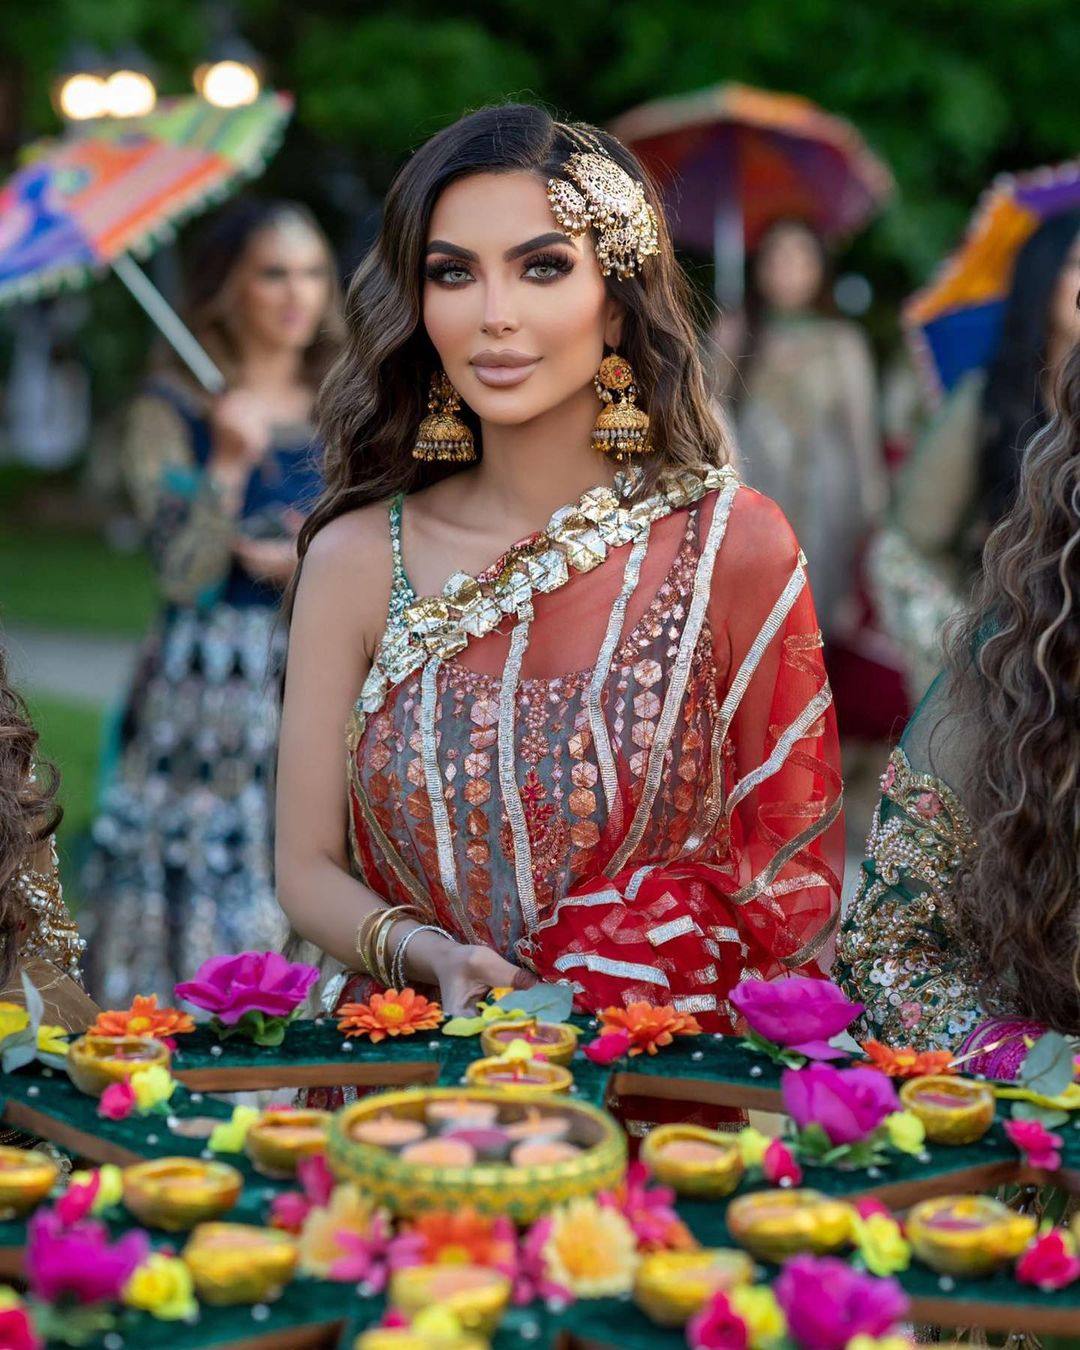 Faryal Makhdoom may be best known as the wife of boxer Amir Khan, but she also runs her own beauty line and boasts 152,000 followers on YouTube. Photo: @faryalmakhdoom/Instagram